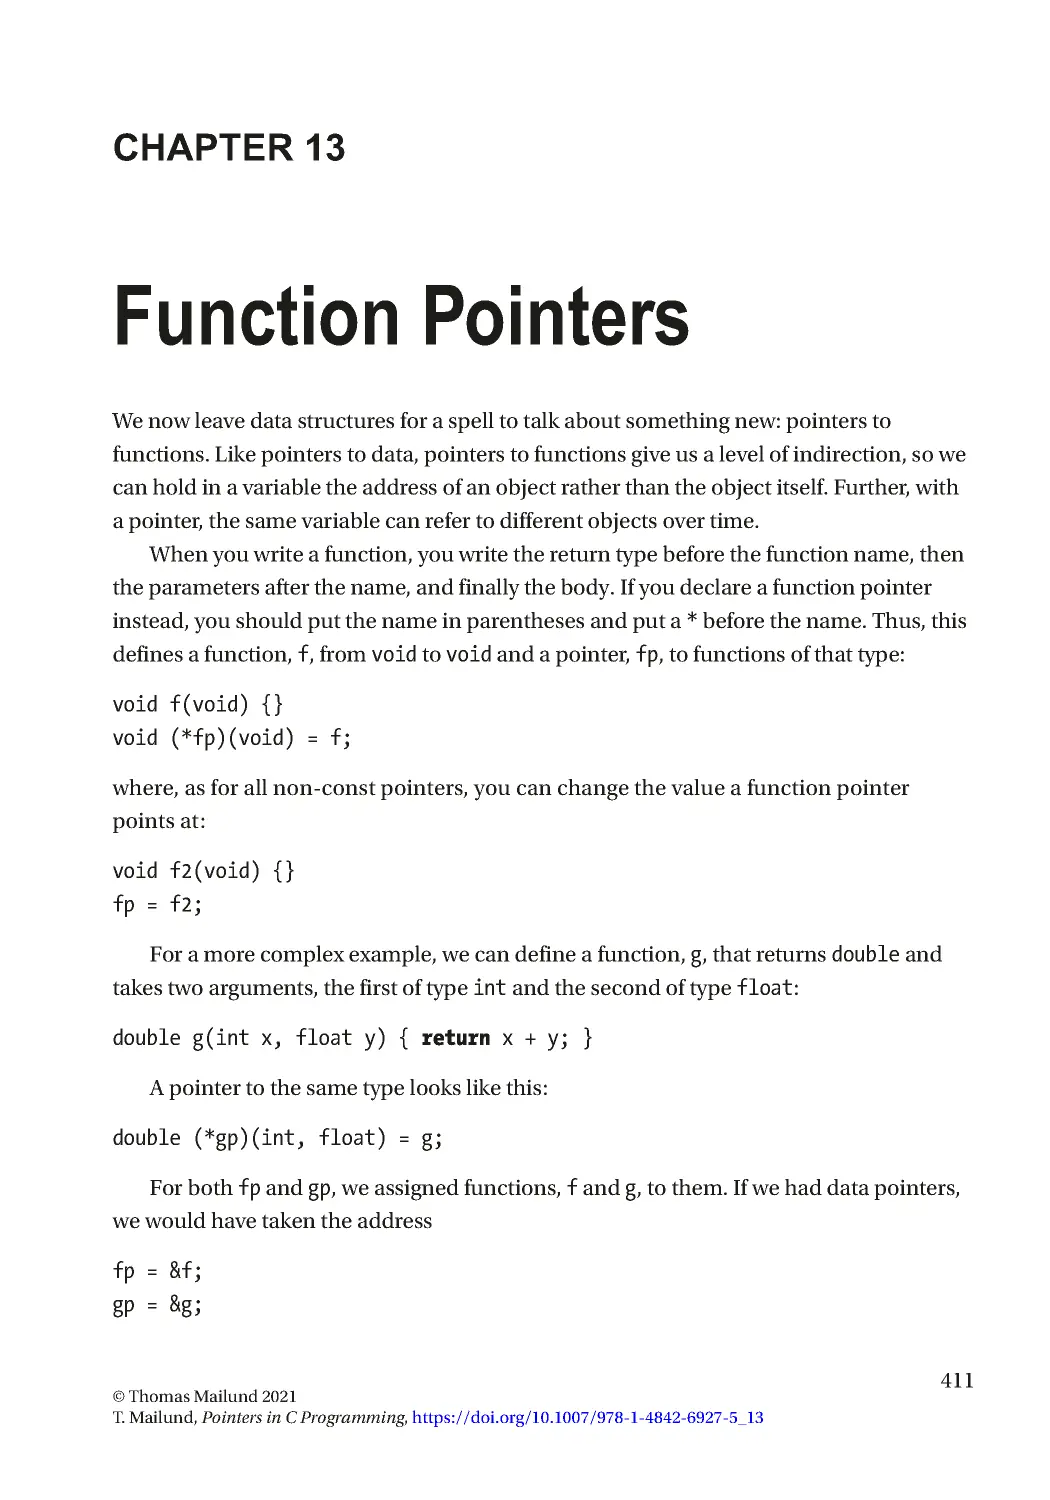 Chapter 13: Function Pointers